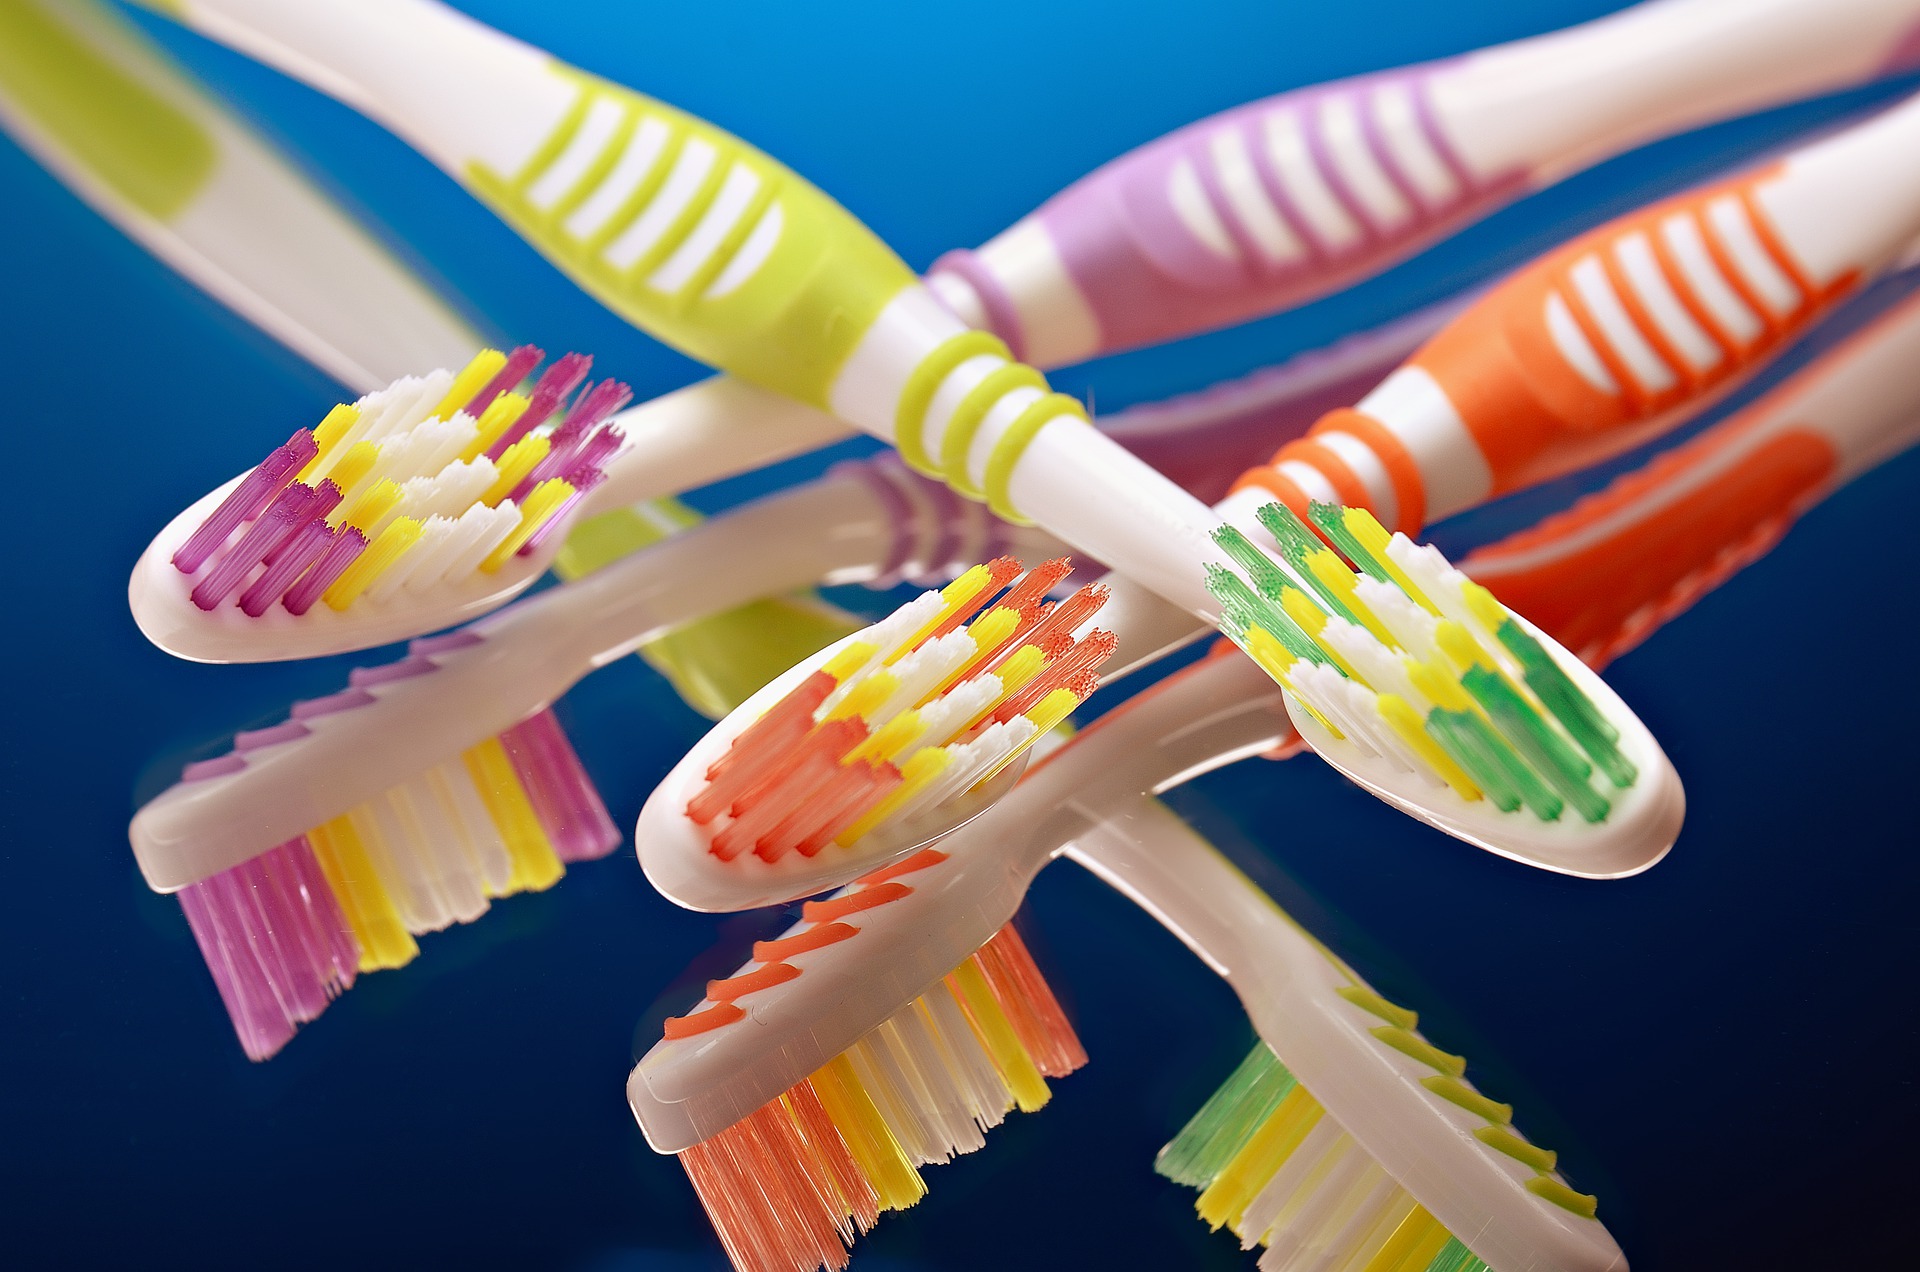 Toothbrushes (source: ds_30, Pixabay)